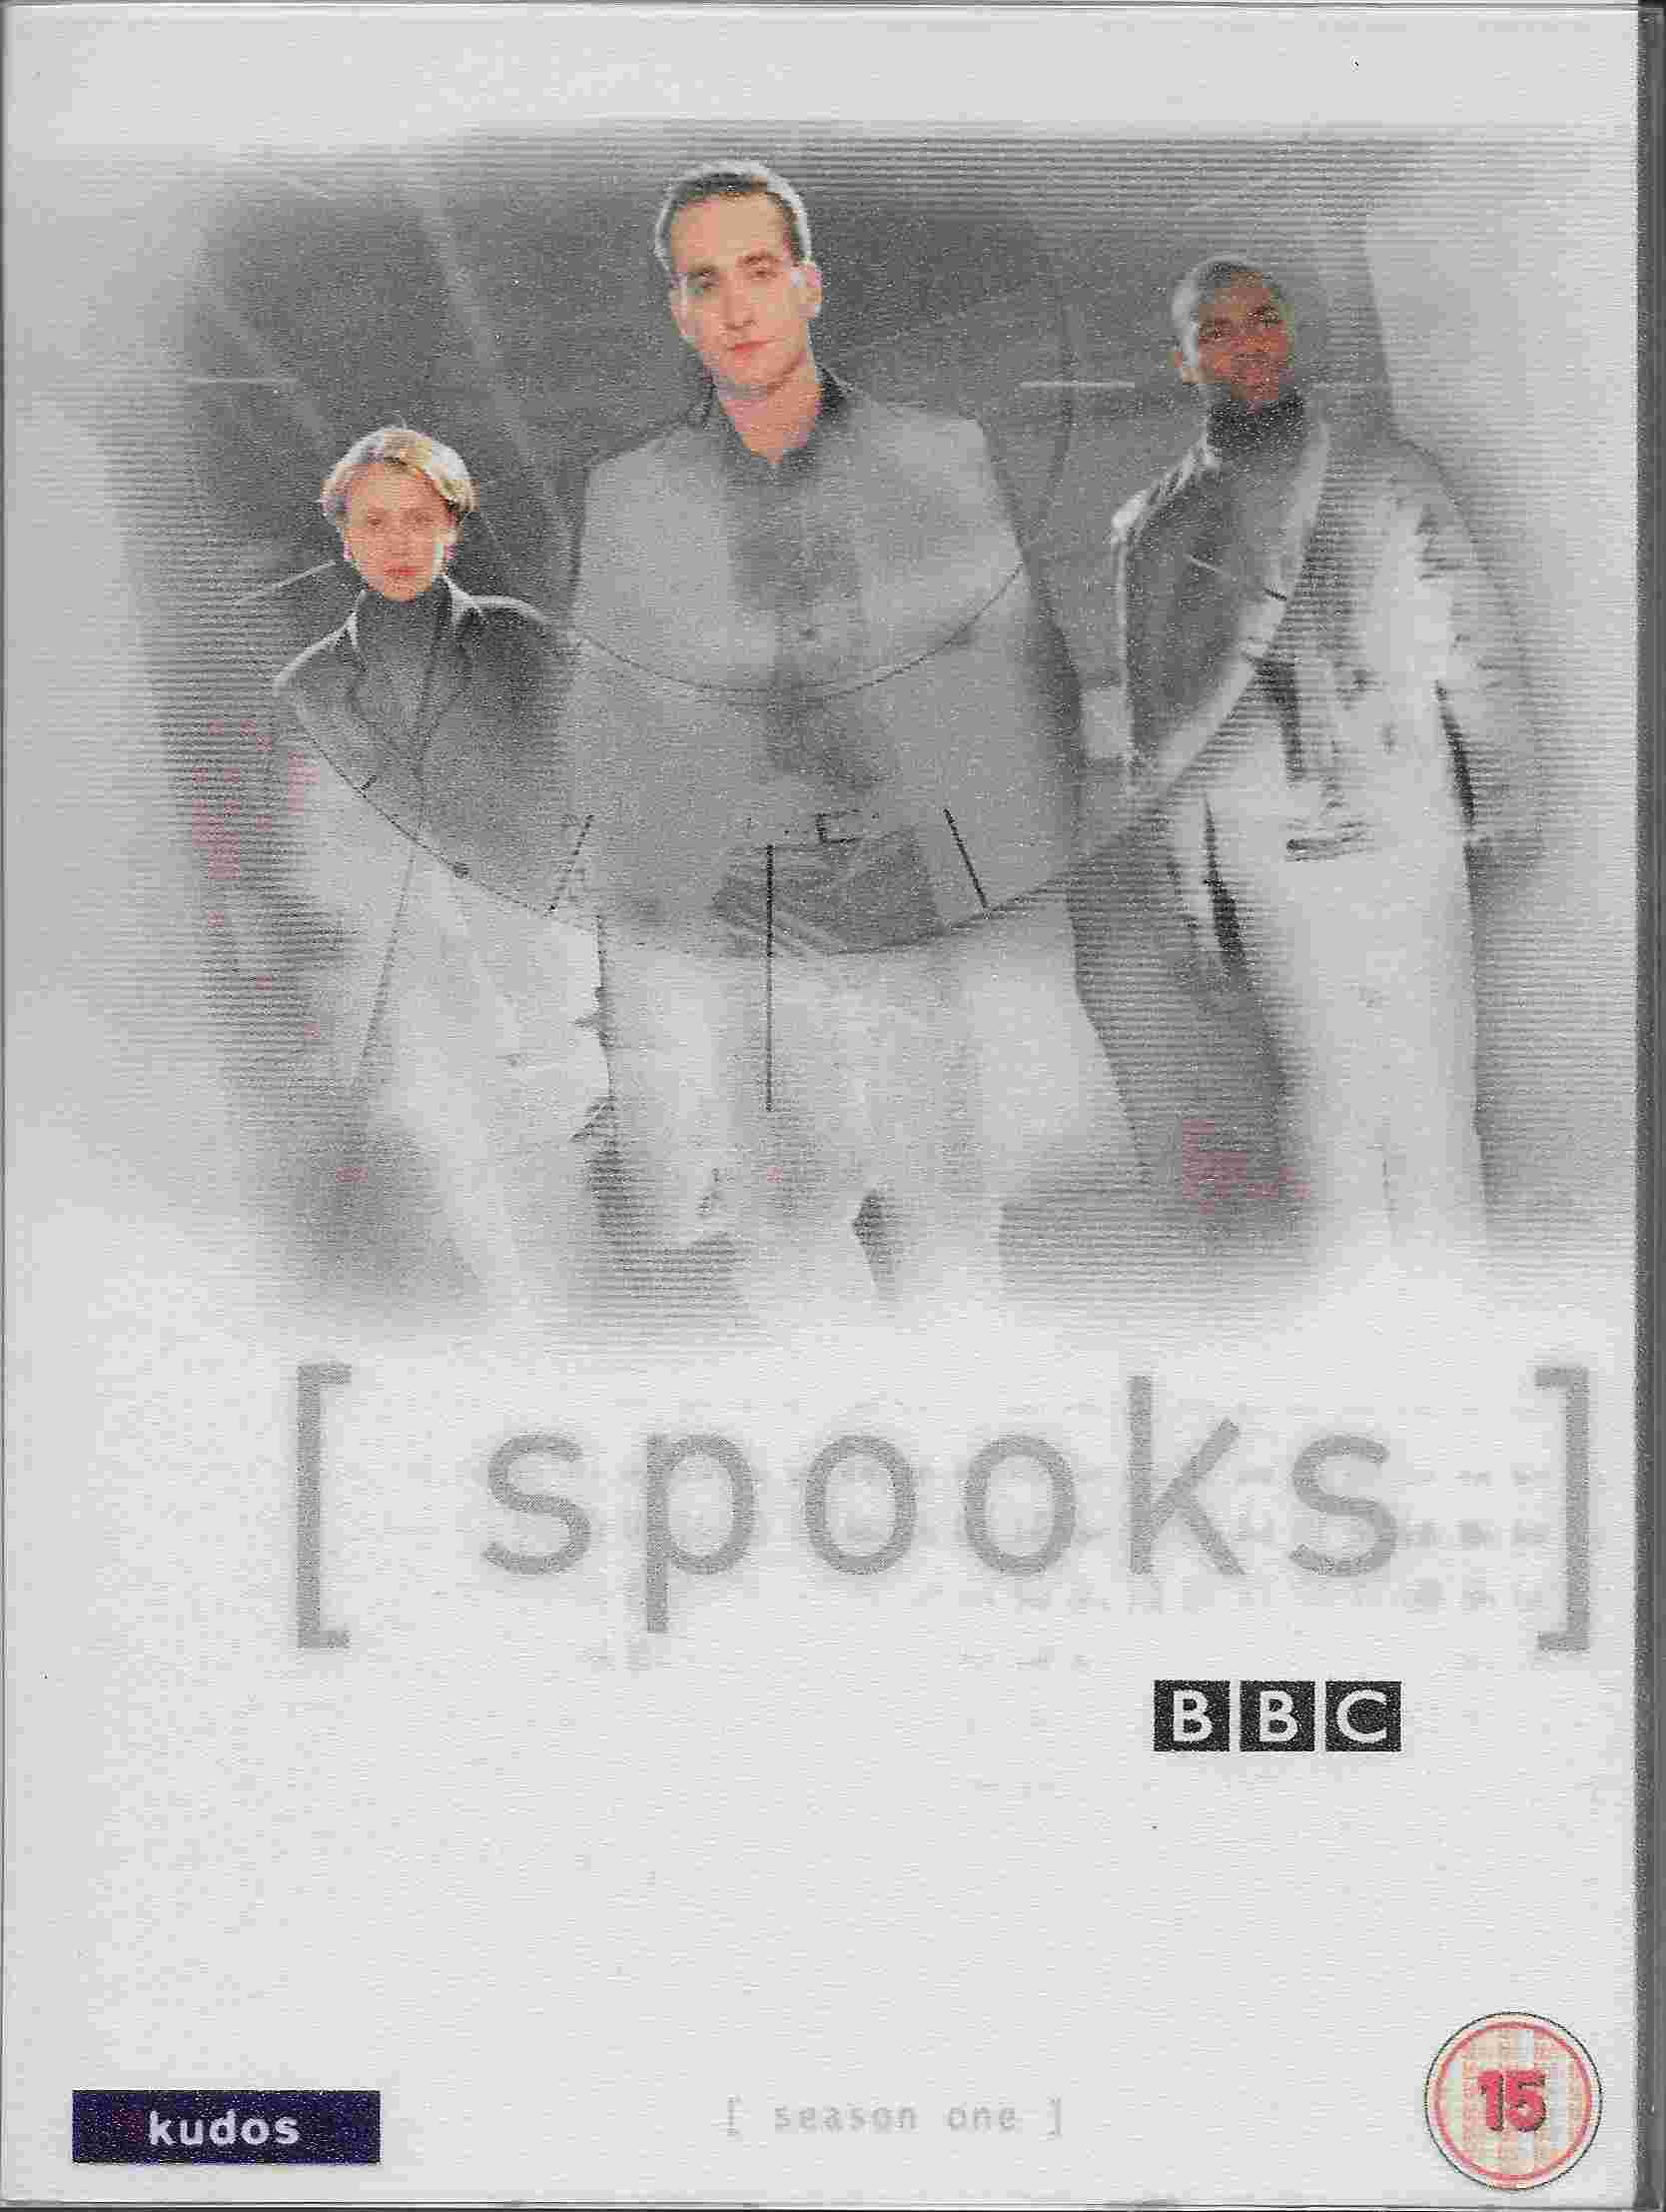 Picture of KLT 62004 [ spooks ] by artist David Wolstencroft / Simon Mirren / Howard Brenton from the BBC dvds - Records and Tapes library